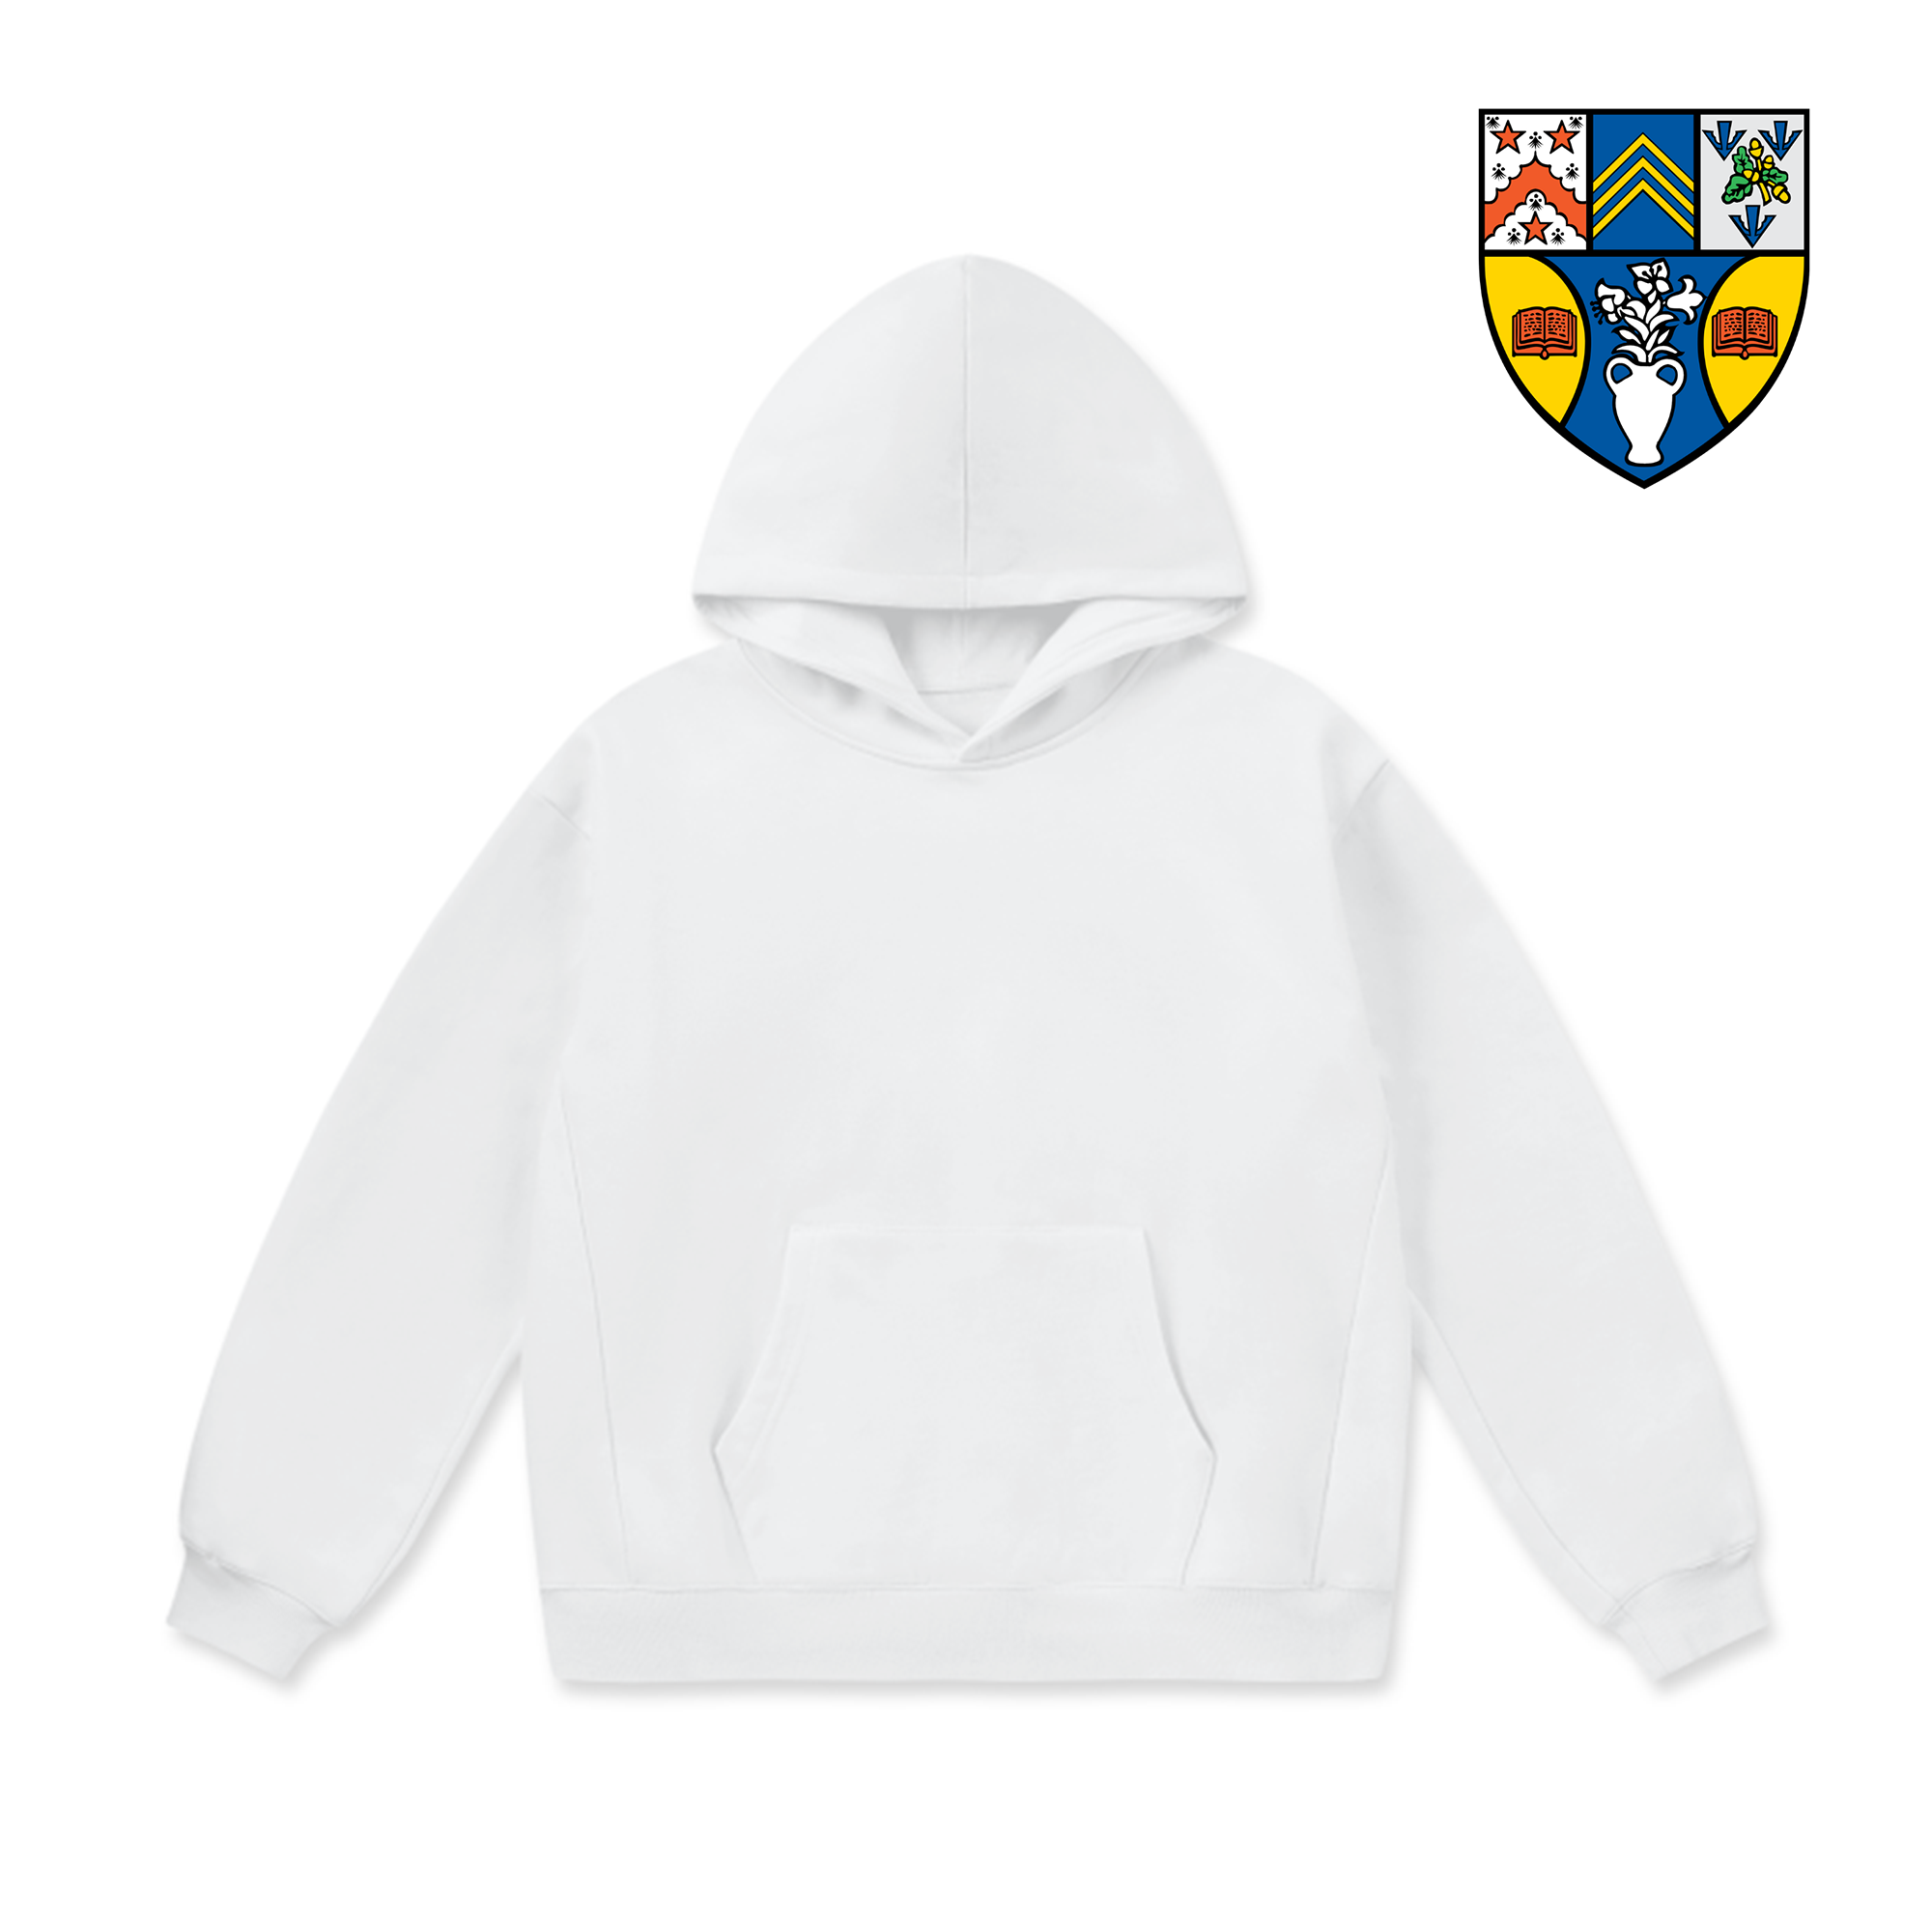 LCC Super Weighted Hoodie - Abertay University (Classic)